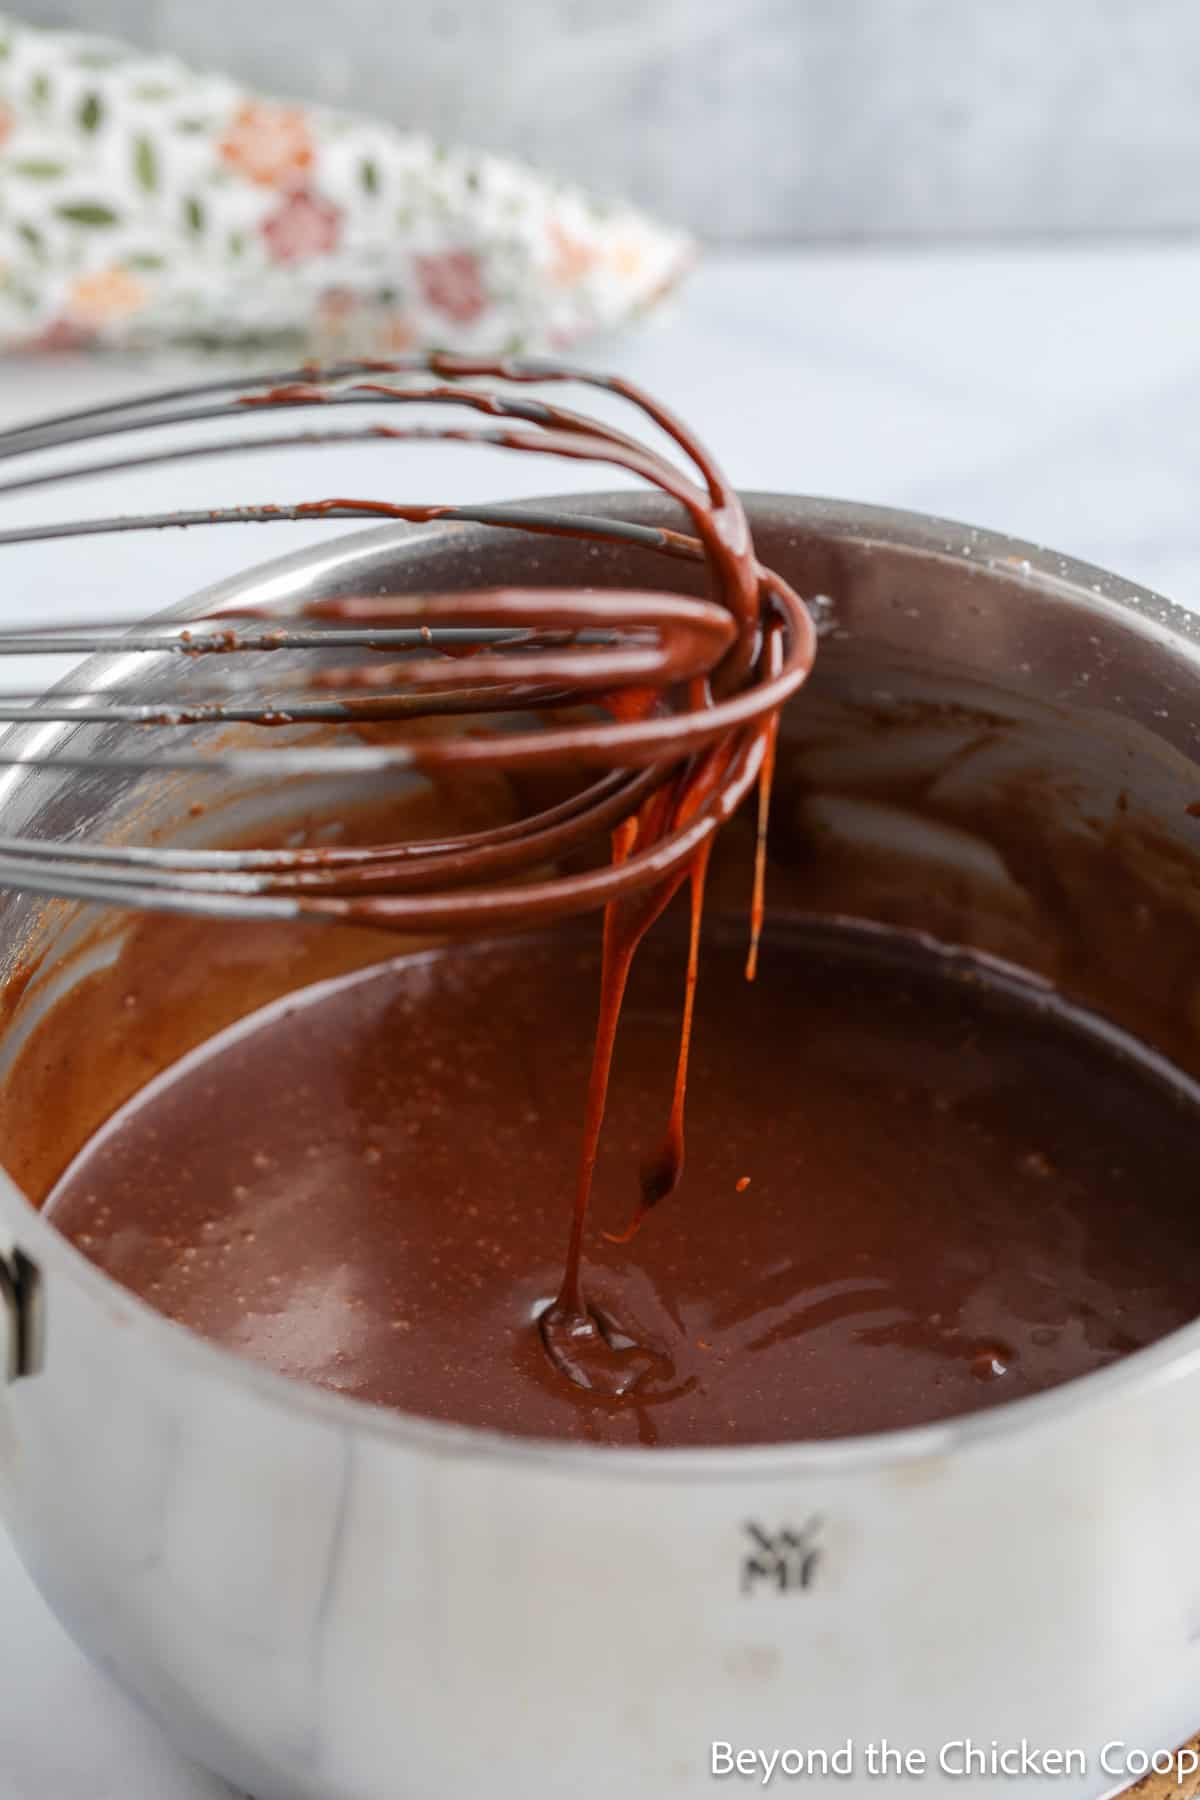 A whisk dripping with chocolate icing. 